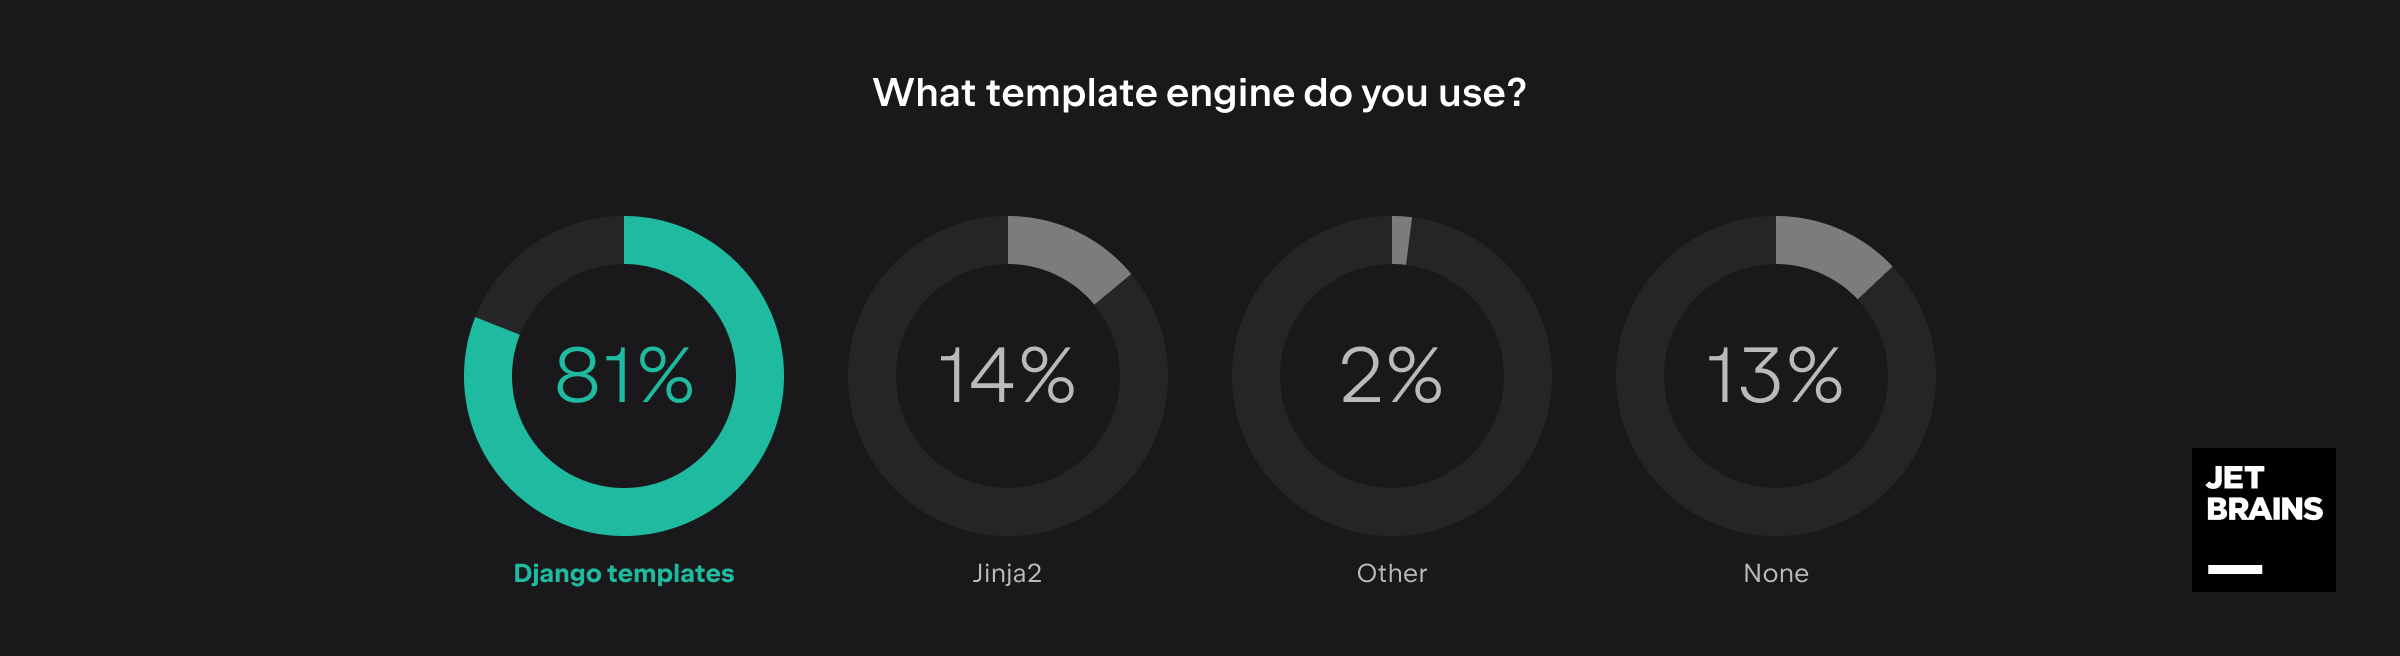 Template engines used by Django developers